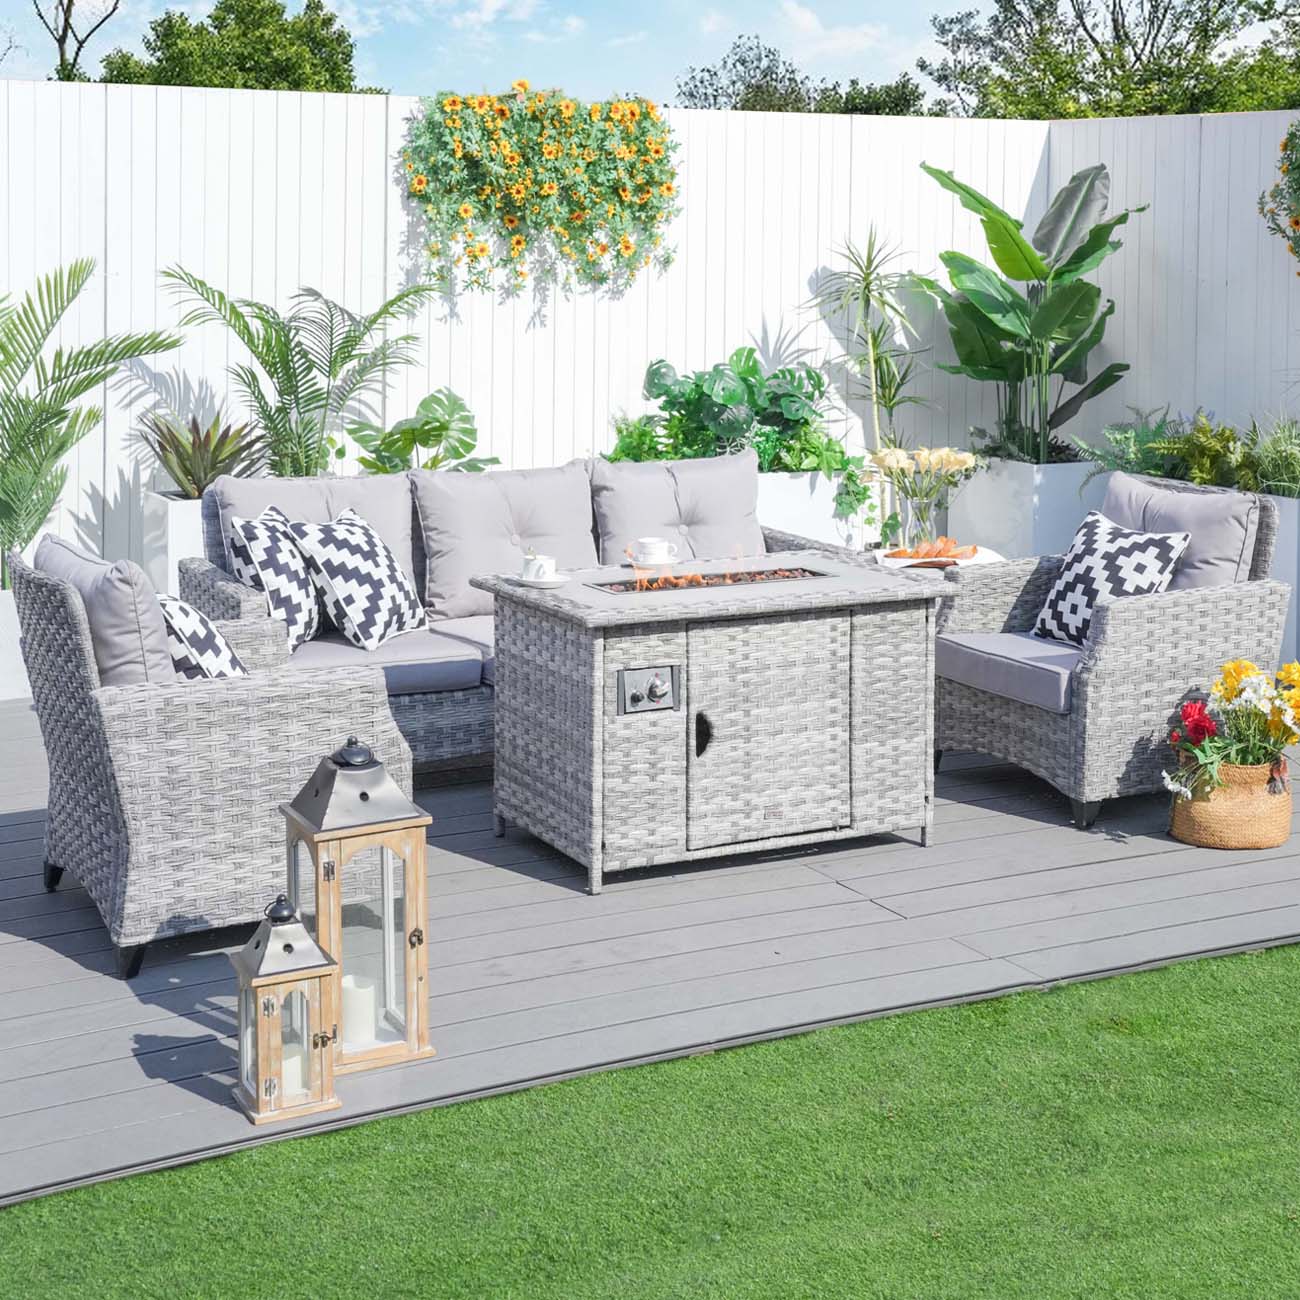 Garden Rattan Wicker Out Furniture Patio Convention Sofa Set With Fire Pit Coffee Table Sale - Abrihome